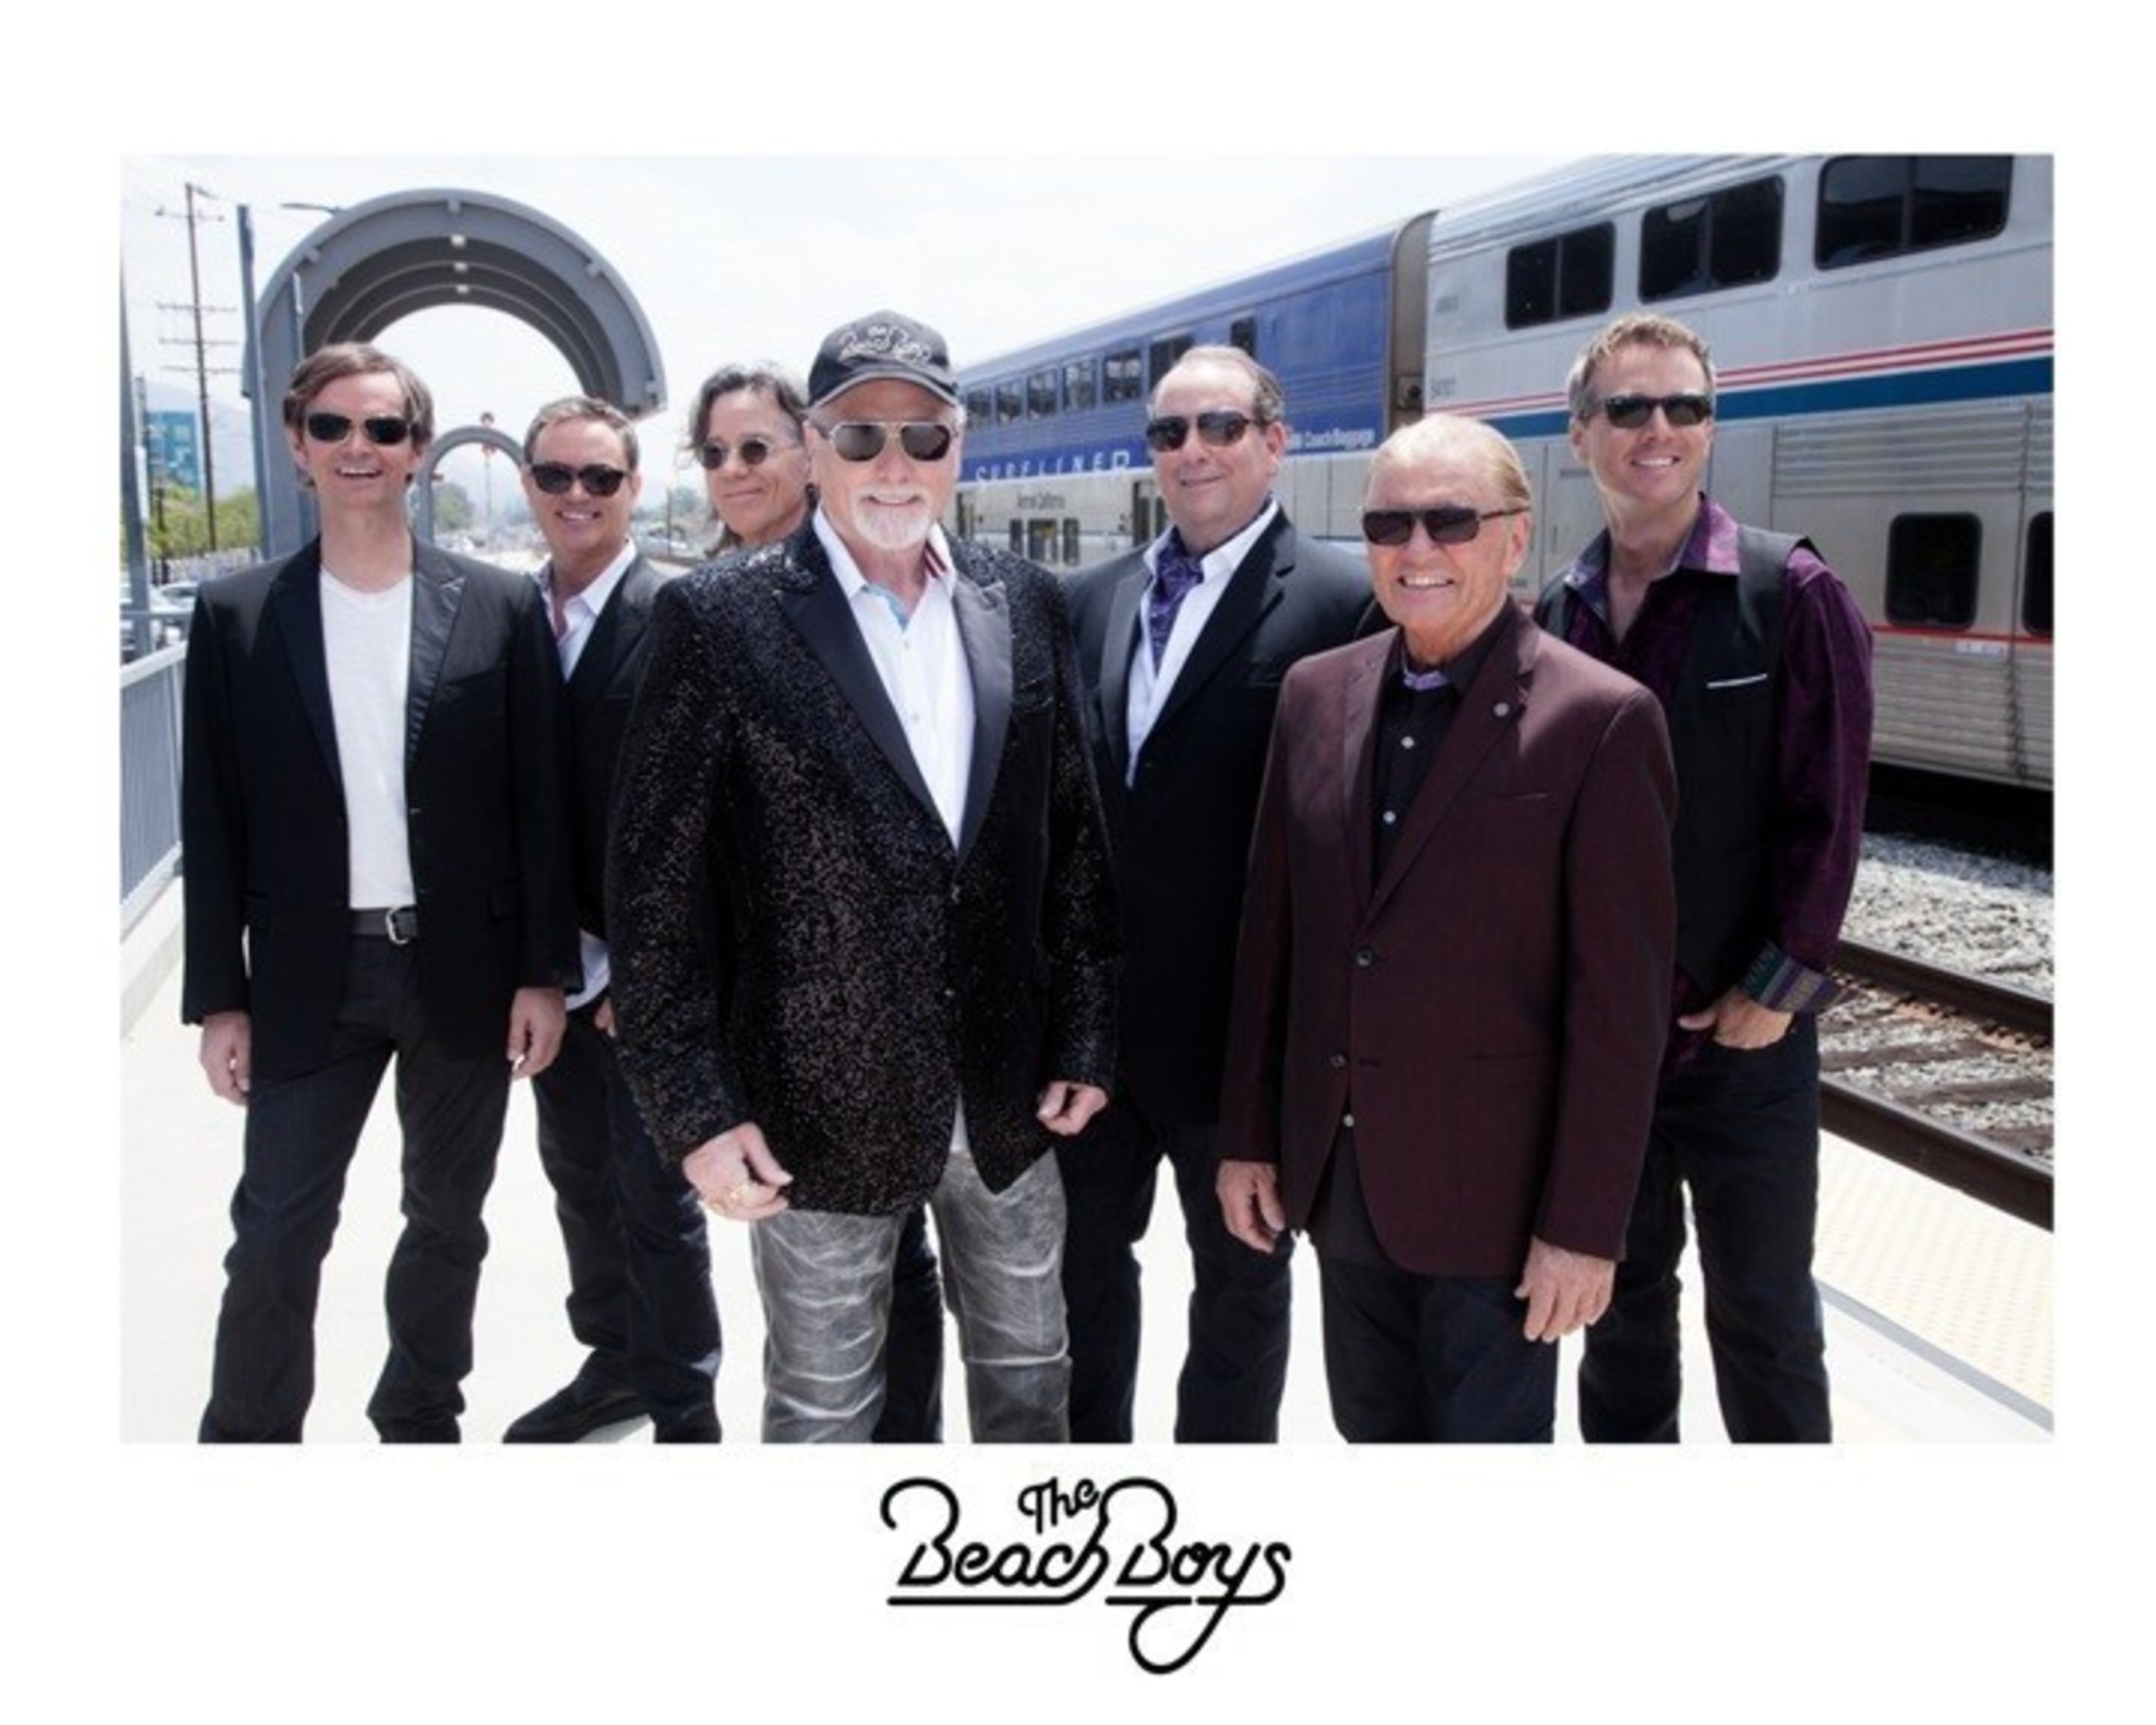 Iconic music legends The Beach Boys will perform live from the West Lawn of the U.S. Capitol on PBS' National Memorial Day Concert Sunday, May 29, 2016 from 8:00 to 9:30 p.m.